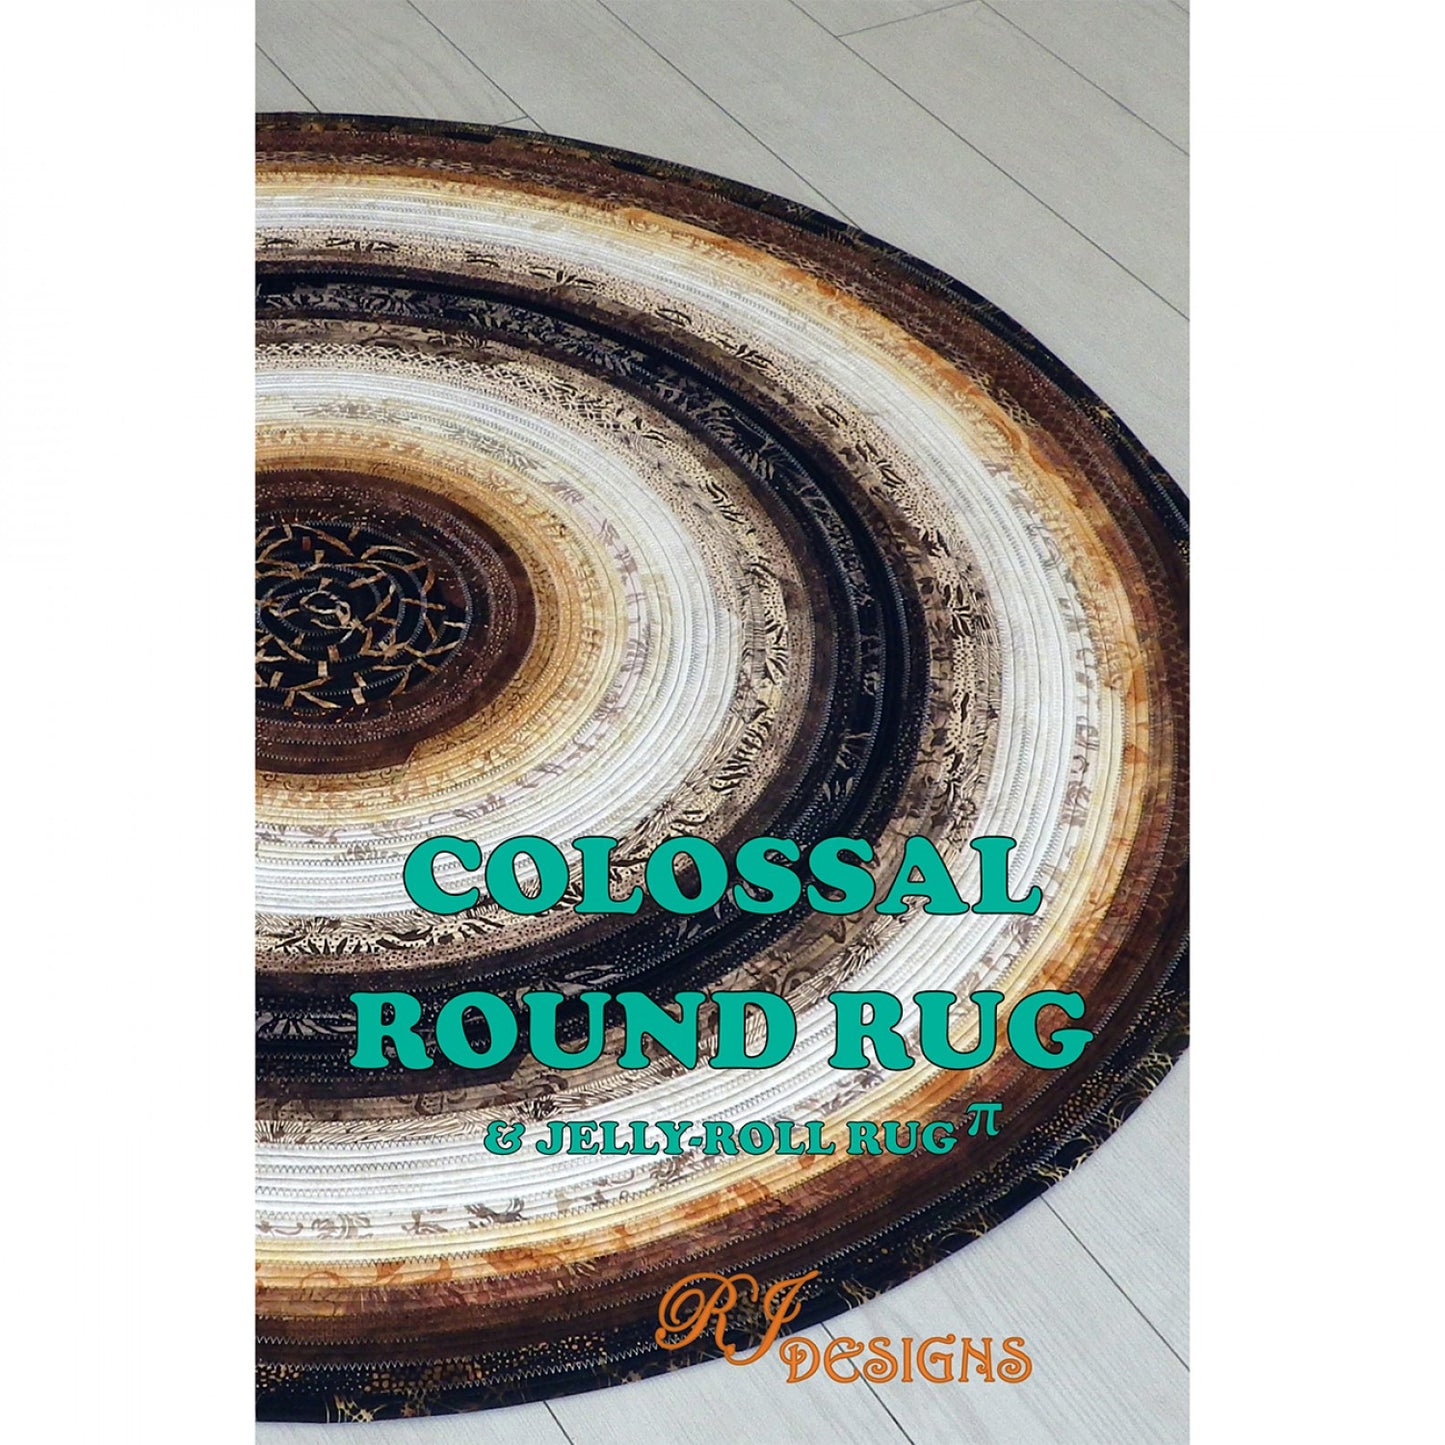 R.J. Designs | Colossal Round Rug & Jelly Roll Rug